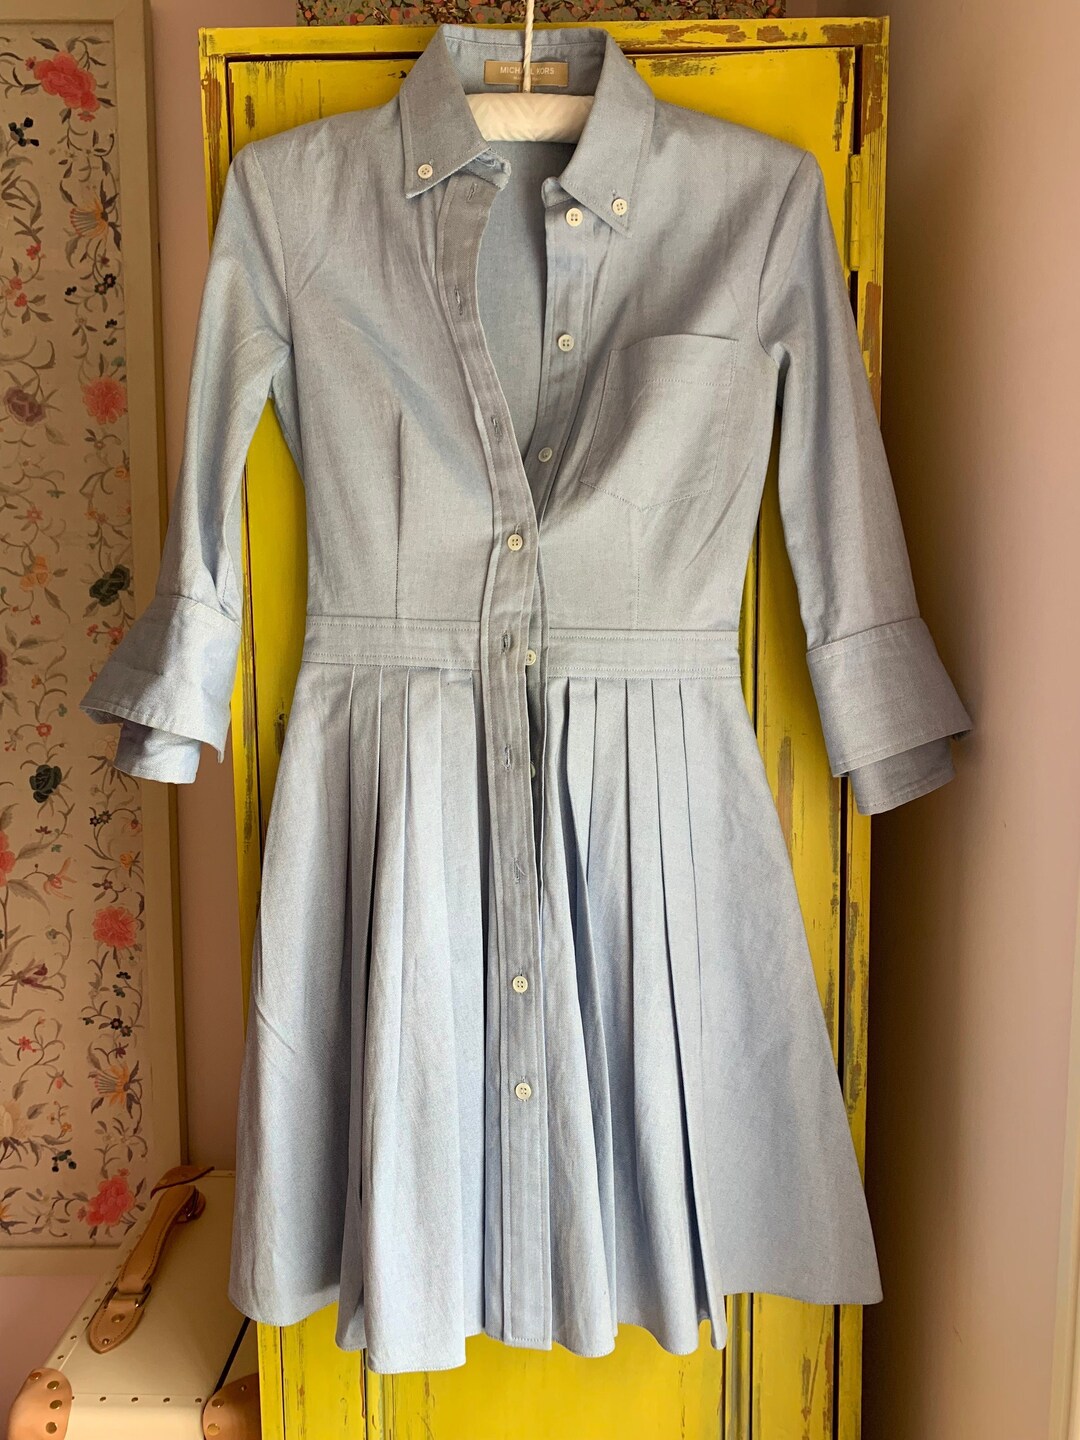 Michael Kors Baby Blue Pleated and Collared Shirt Dress - Etsy